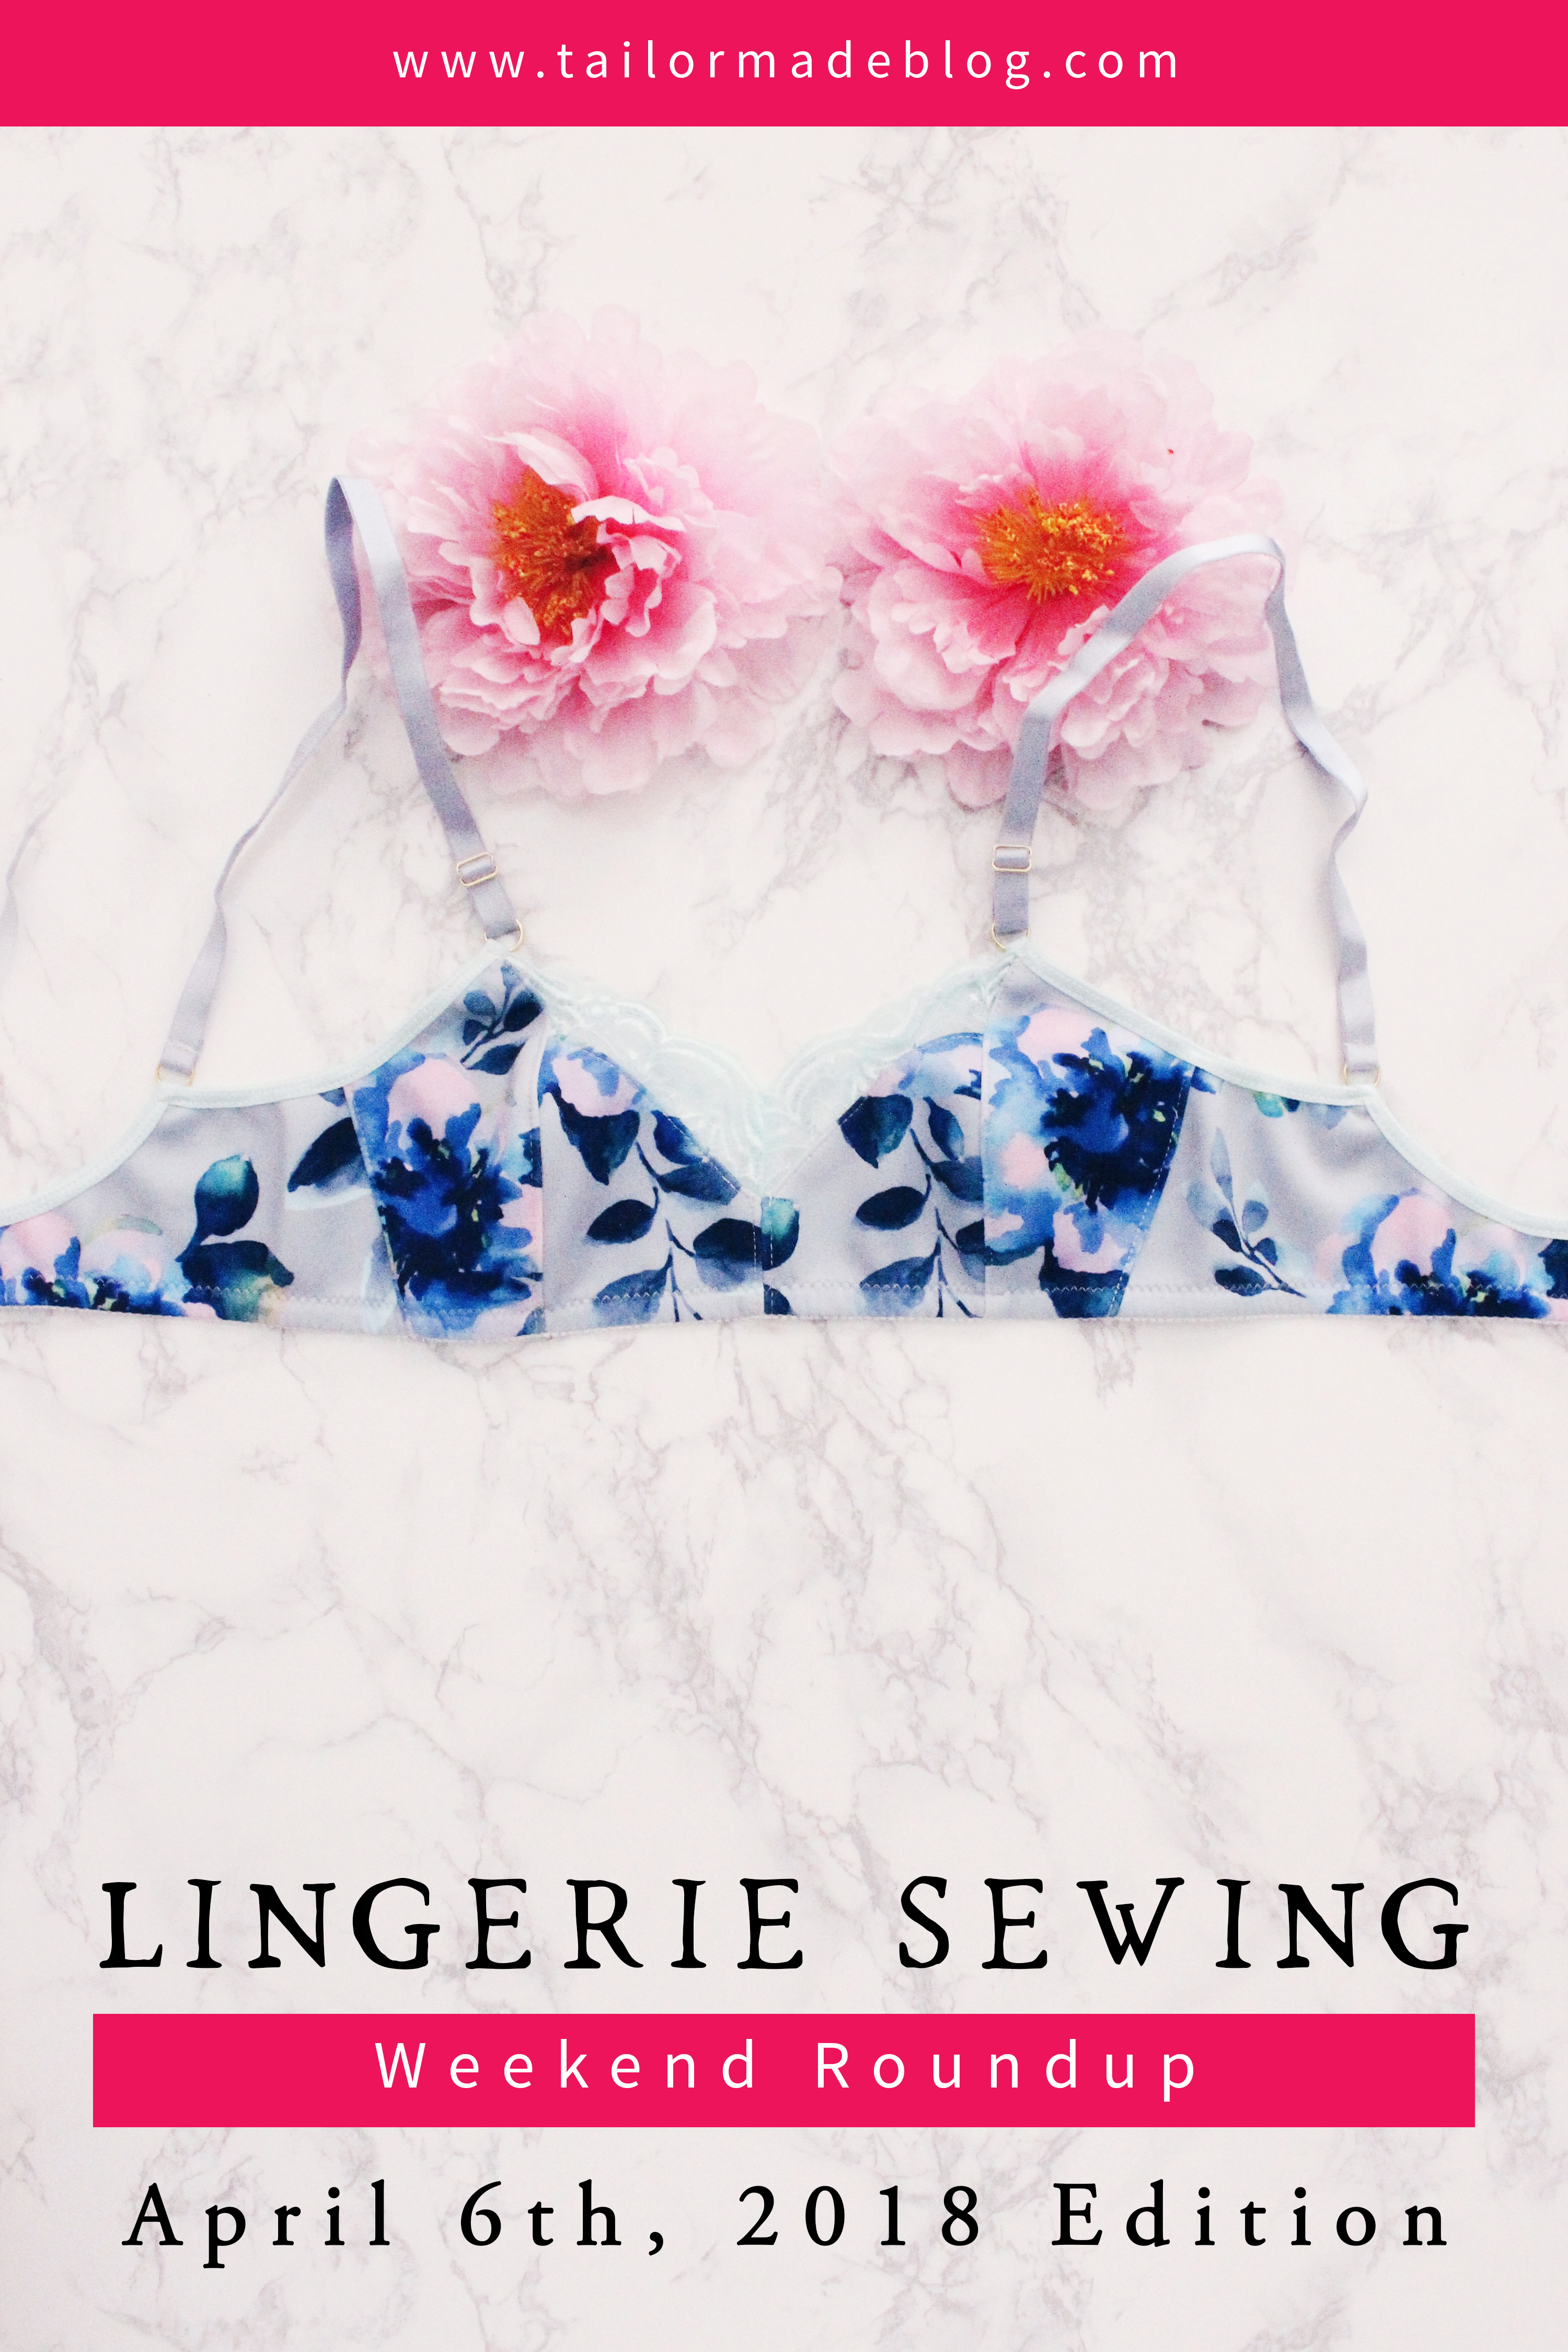 April 6th, 2018 Lingerie Sewing Weekend Round Up Latest news and makes and sewing projects from the lingerie sewing bra making community